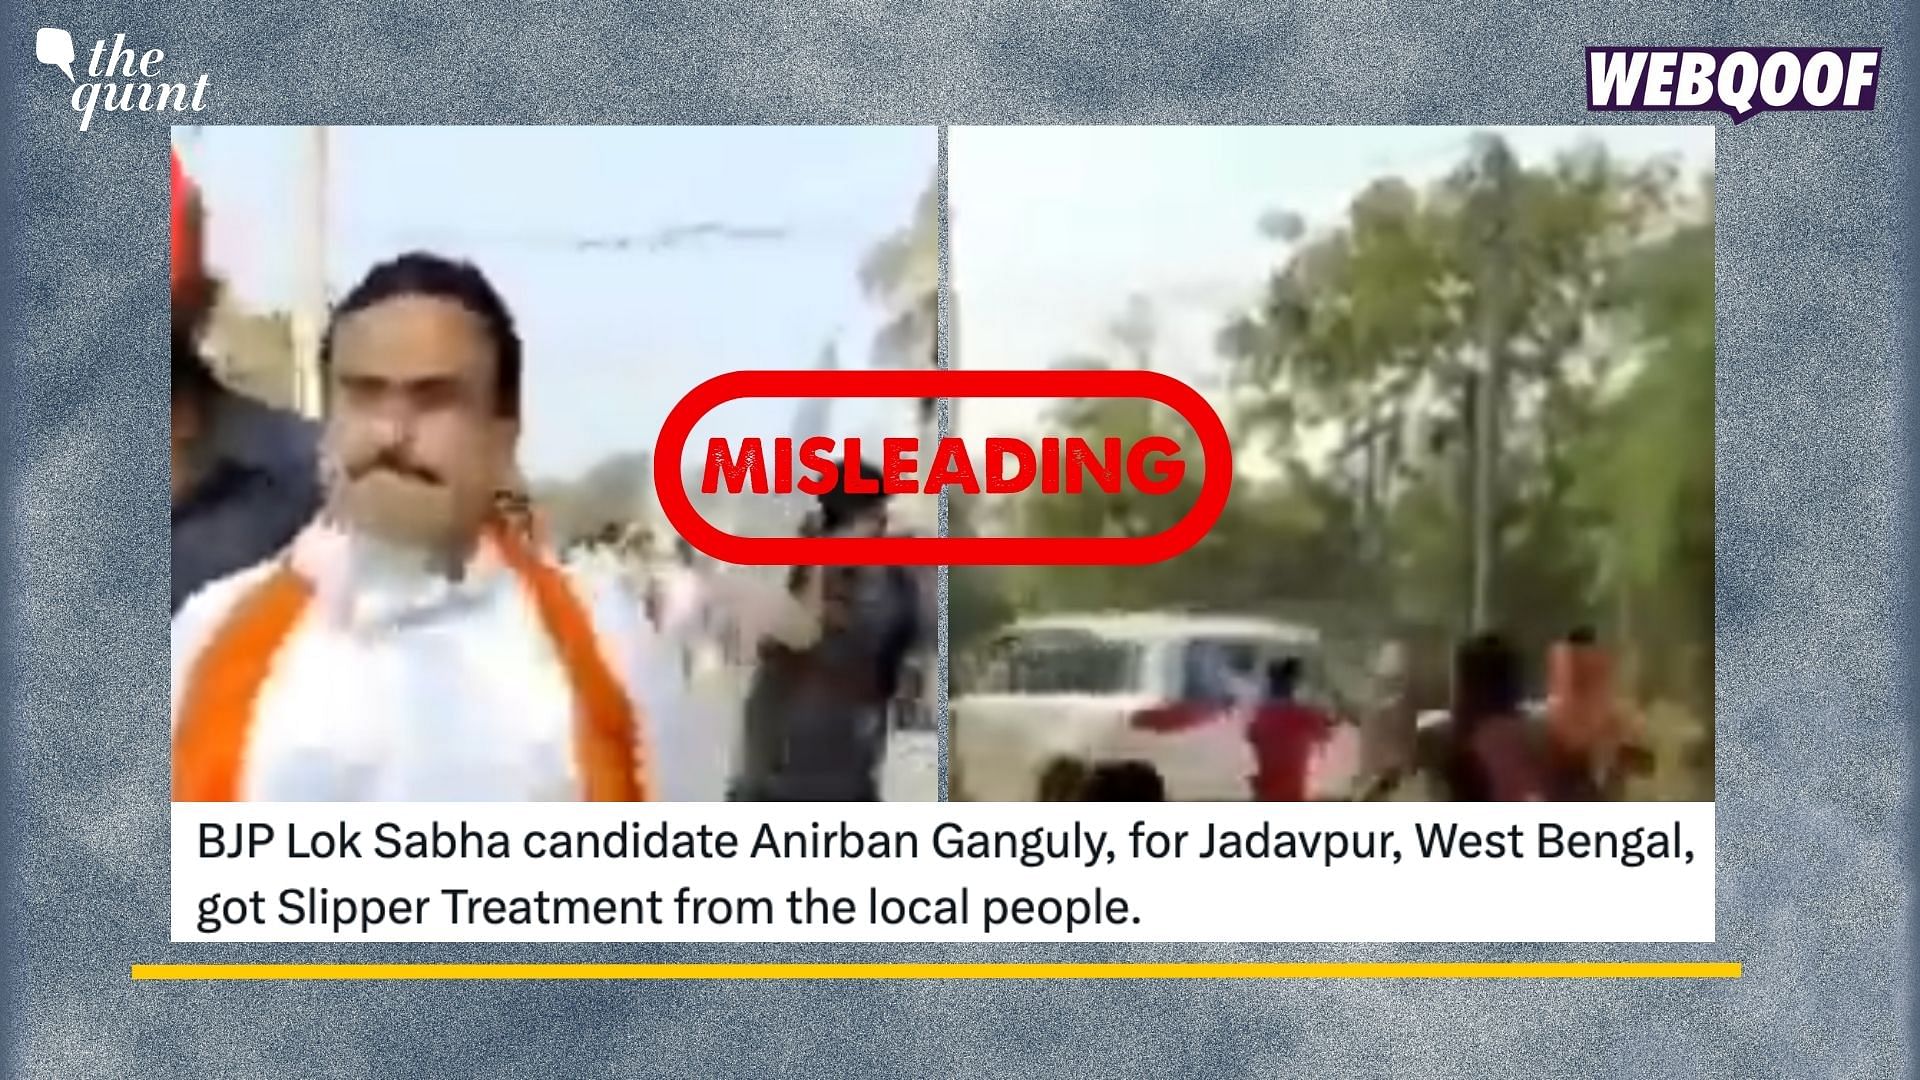 <div class="paragraphs"><p>Fact-Check: Old video of attack on BJP's Anirban Ganguly shared as recent.&nbsp;</p></div>